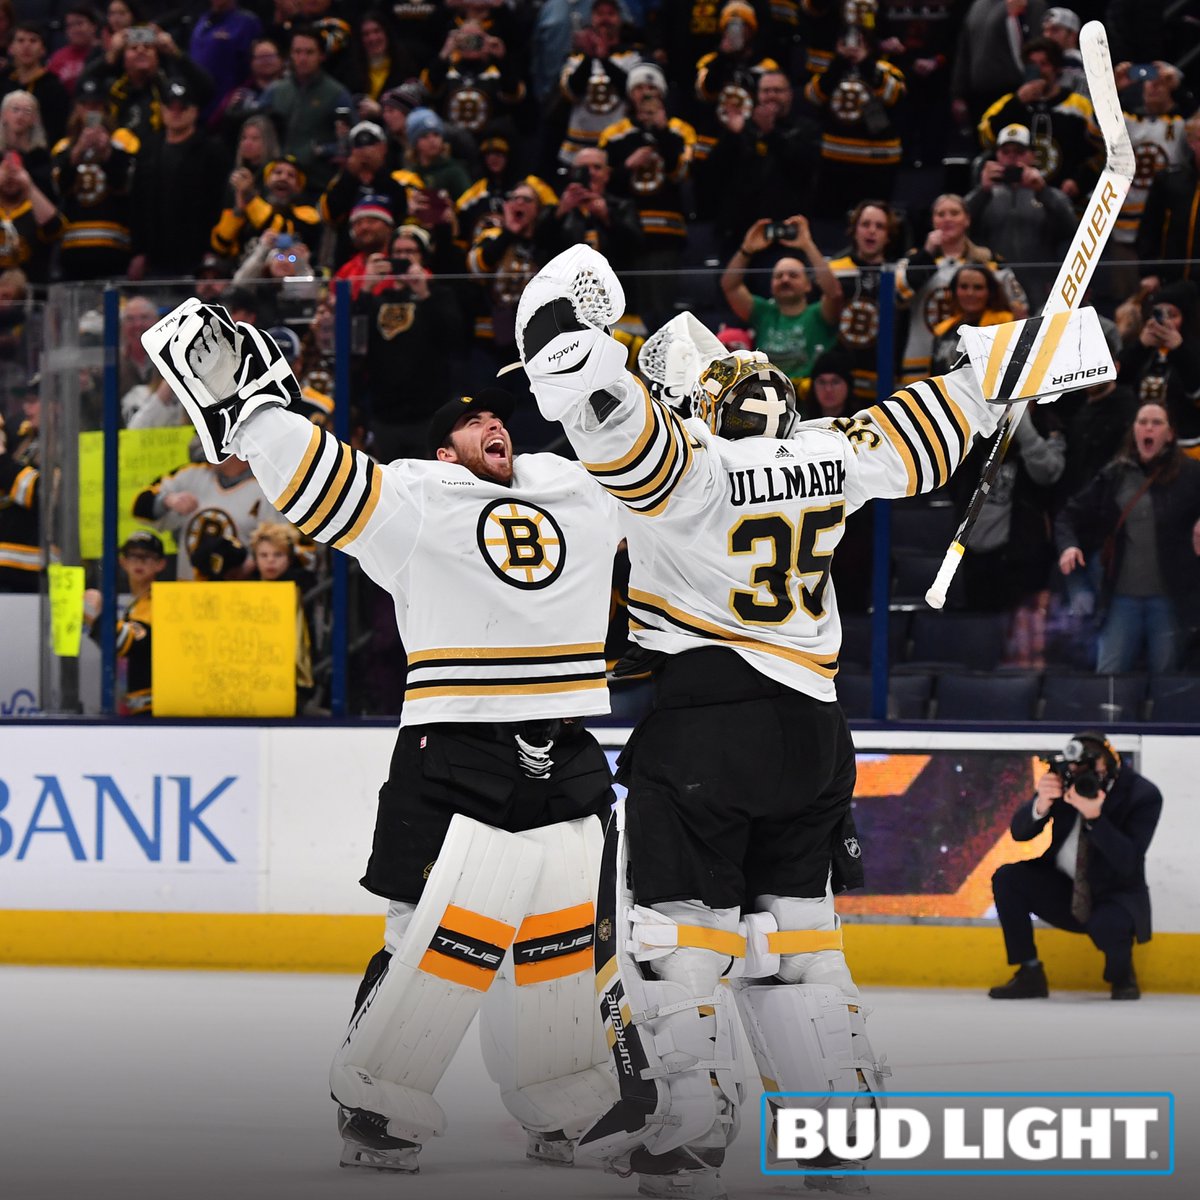 These two. 

#EasyToCelebrate | @budlight